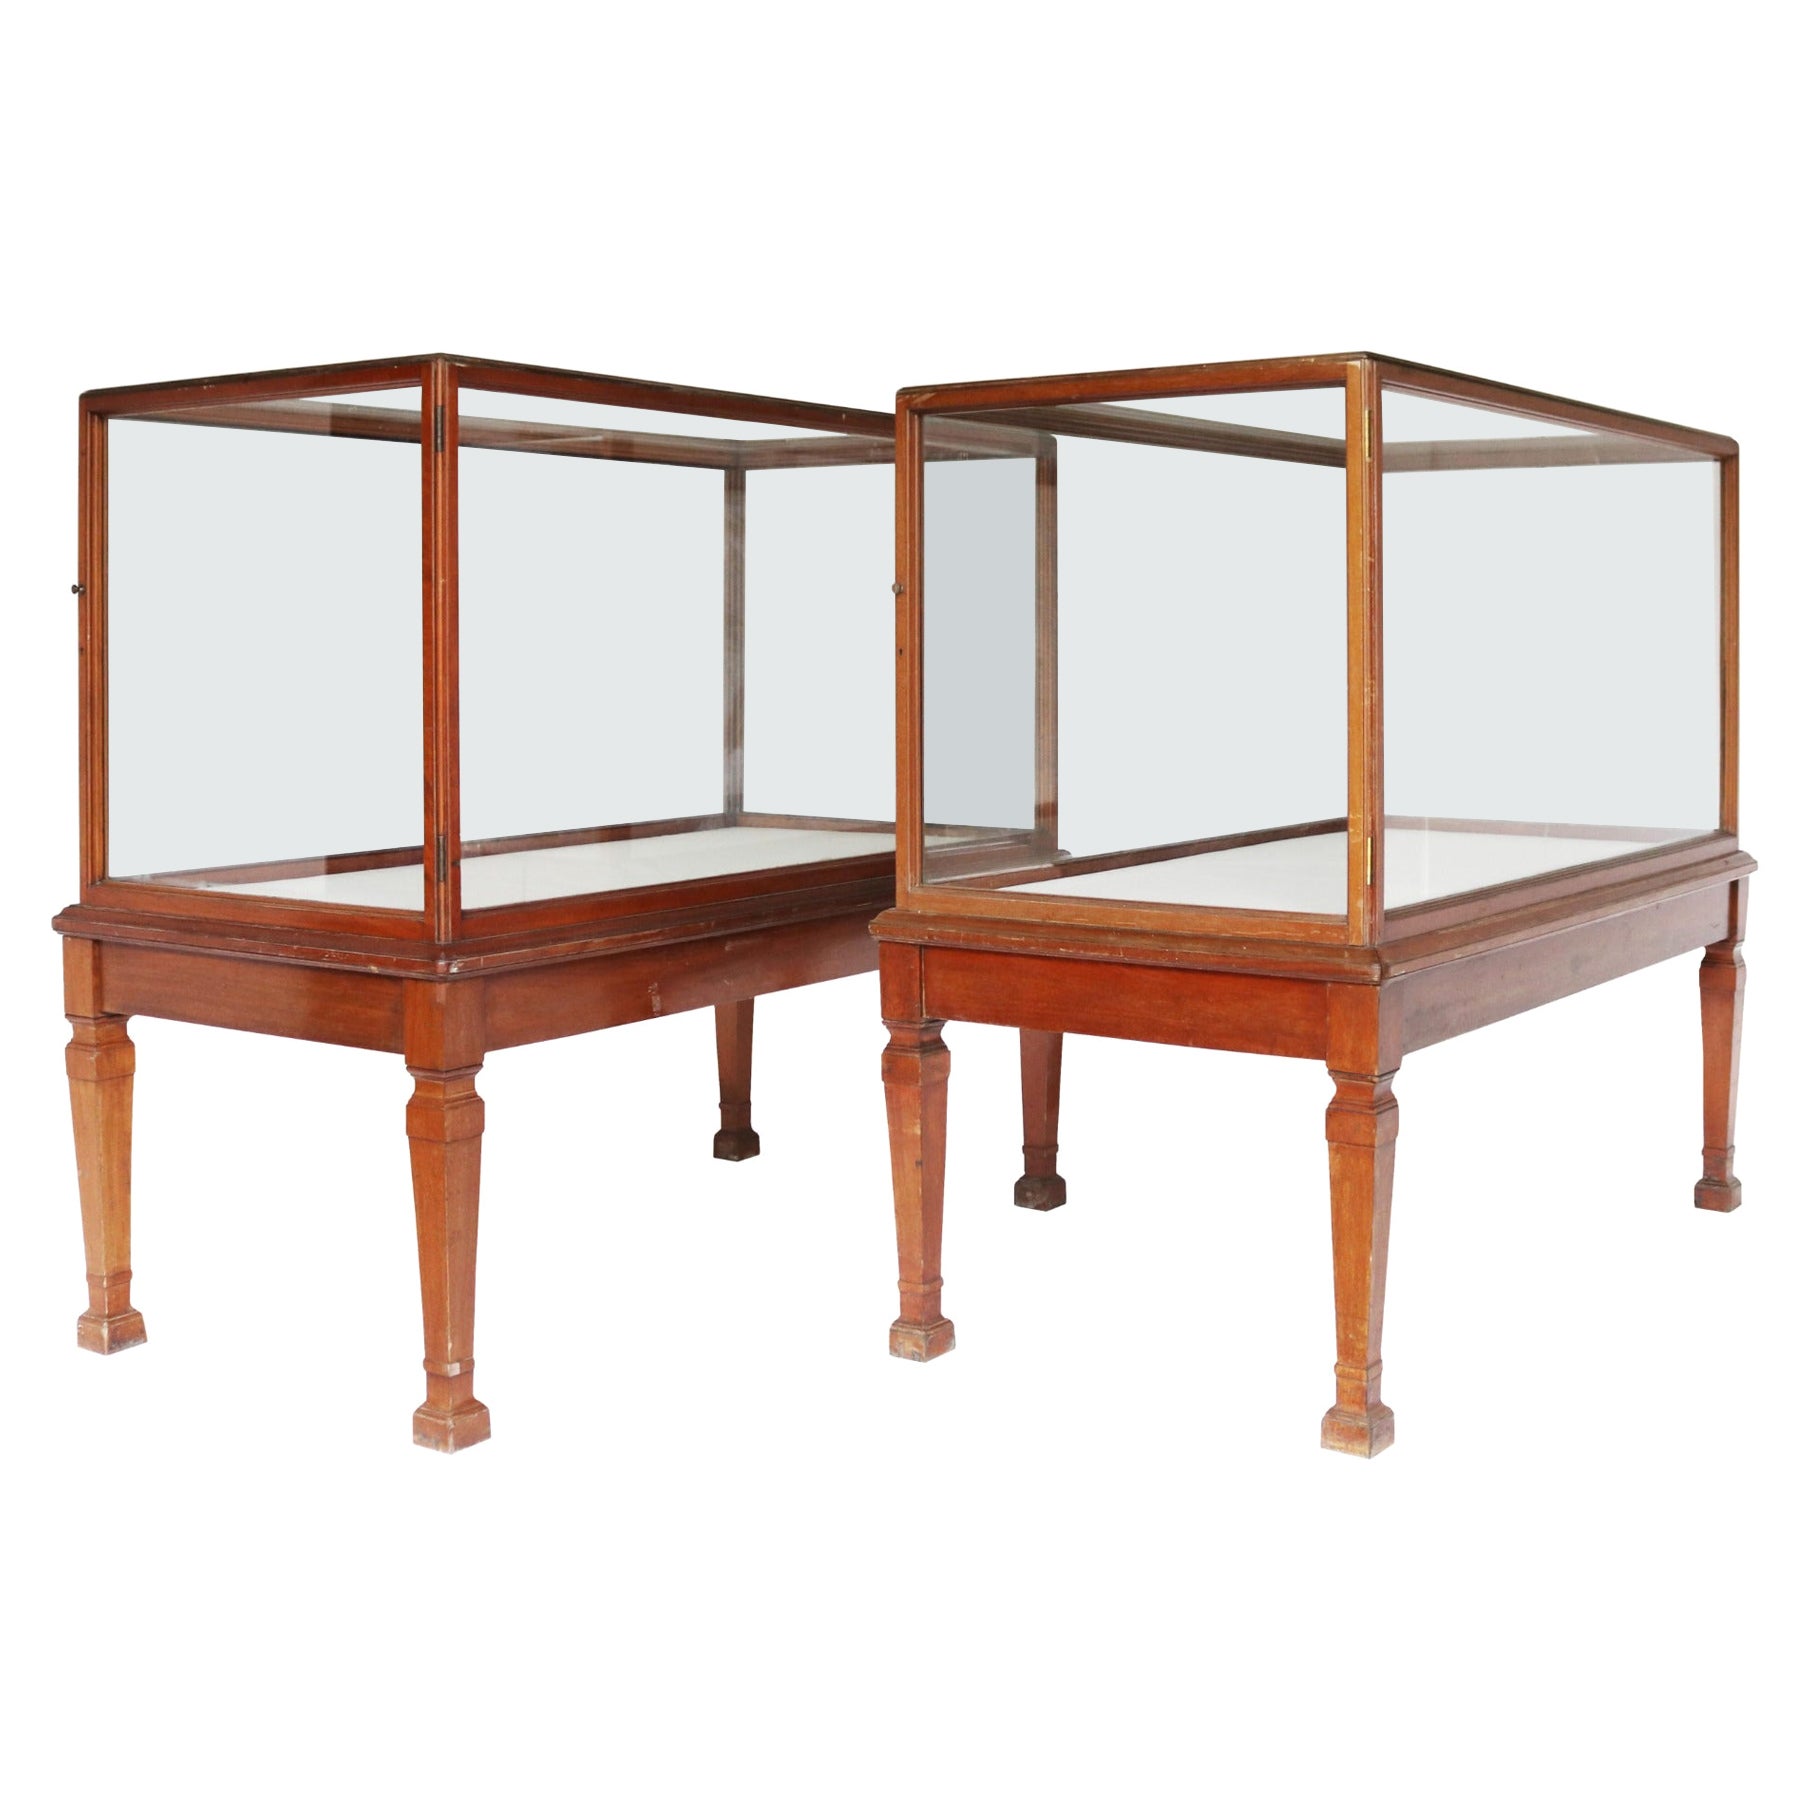 Two Antique Glazed Museum Display Cabinets For Sale